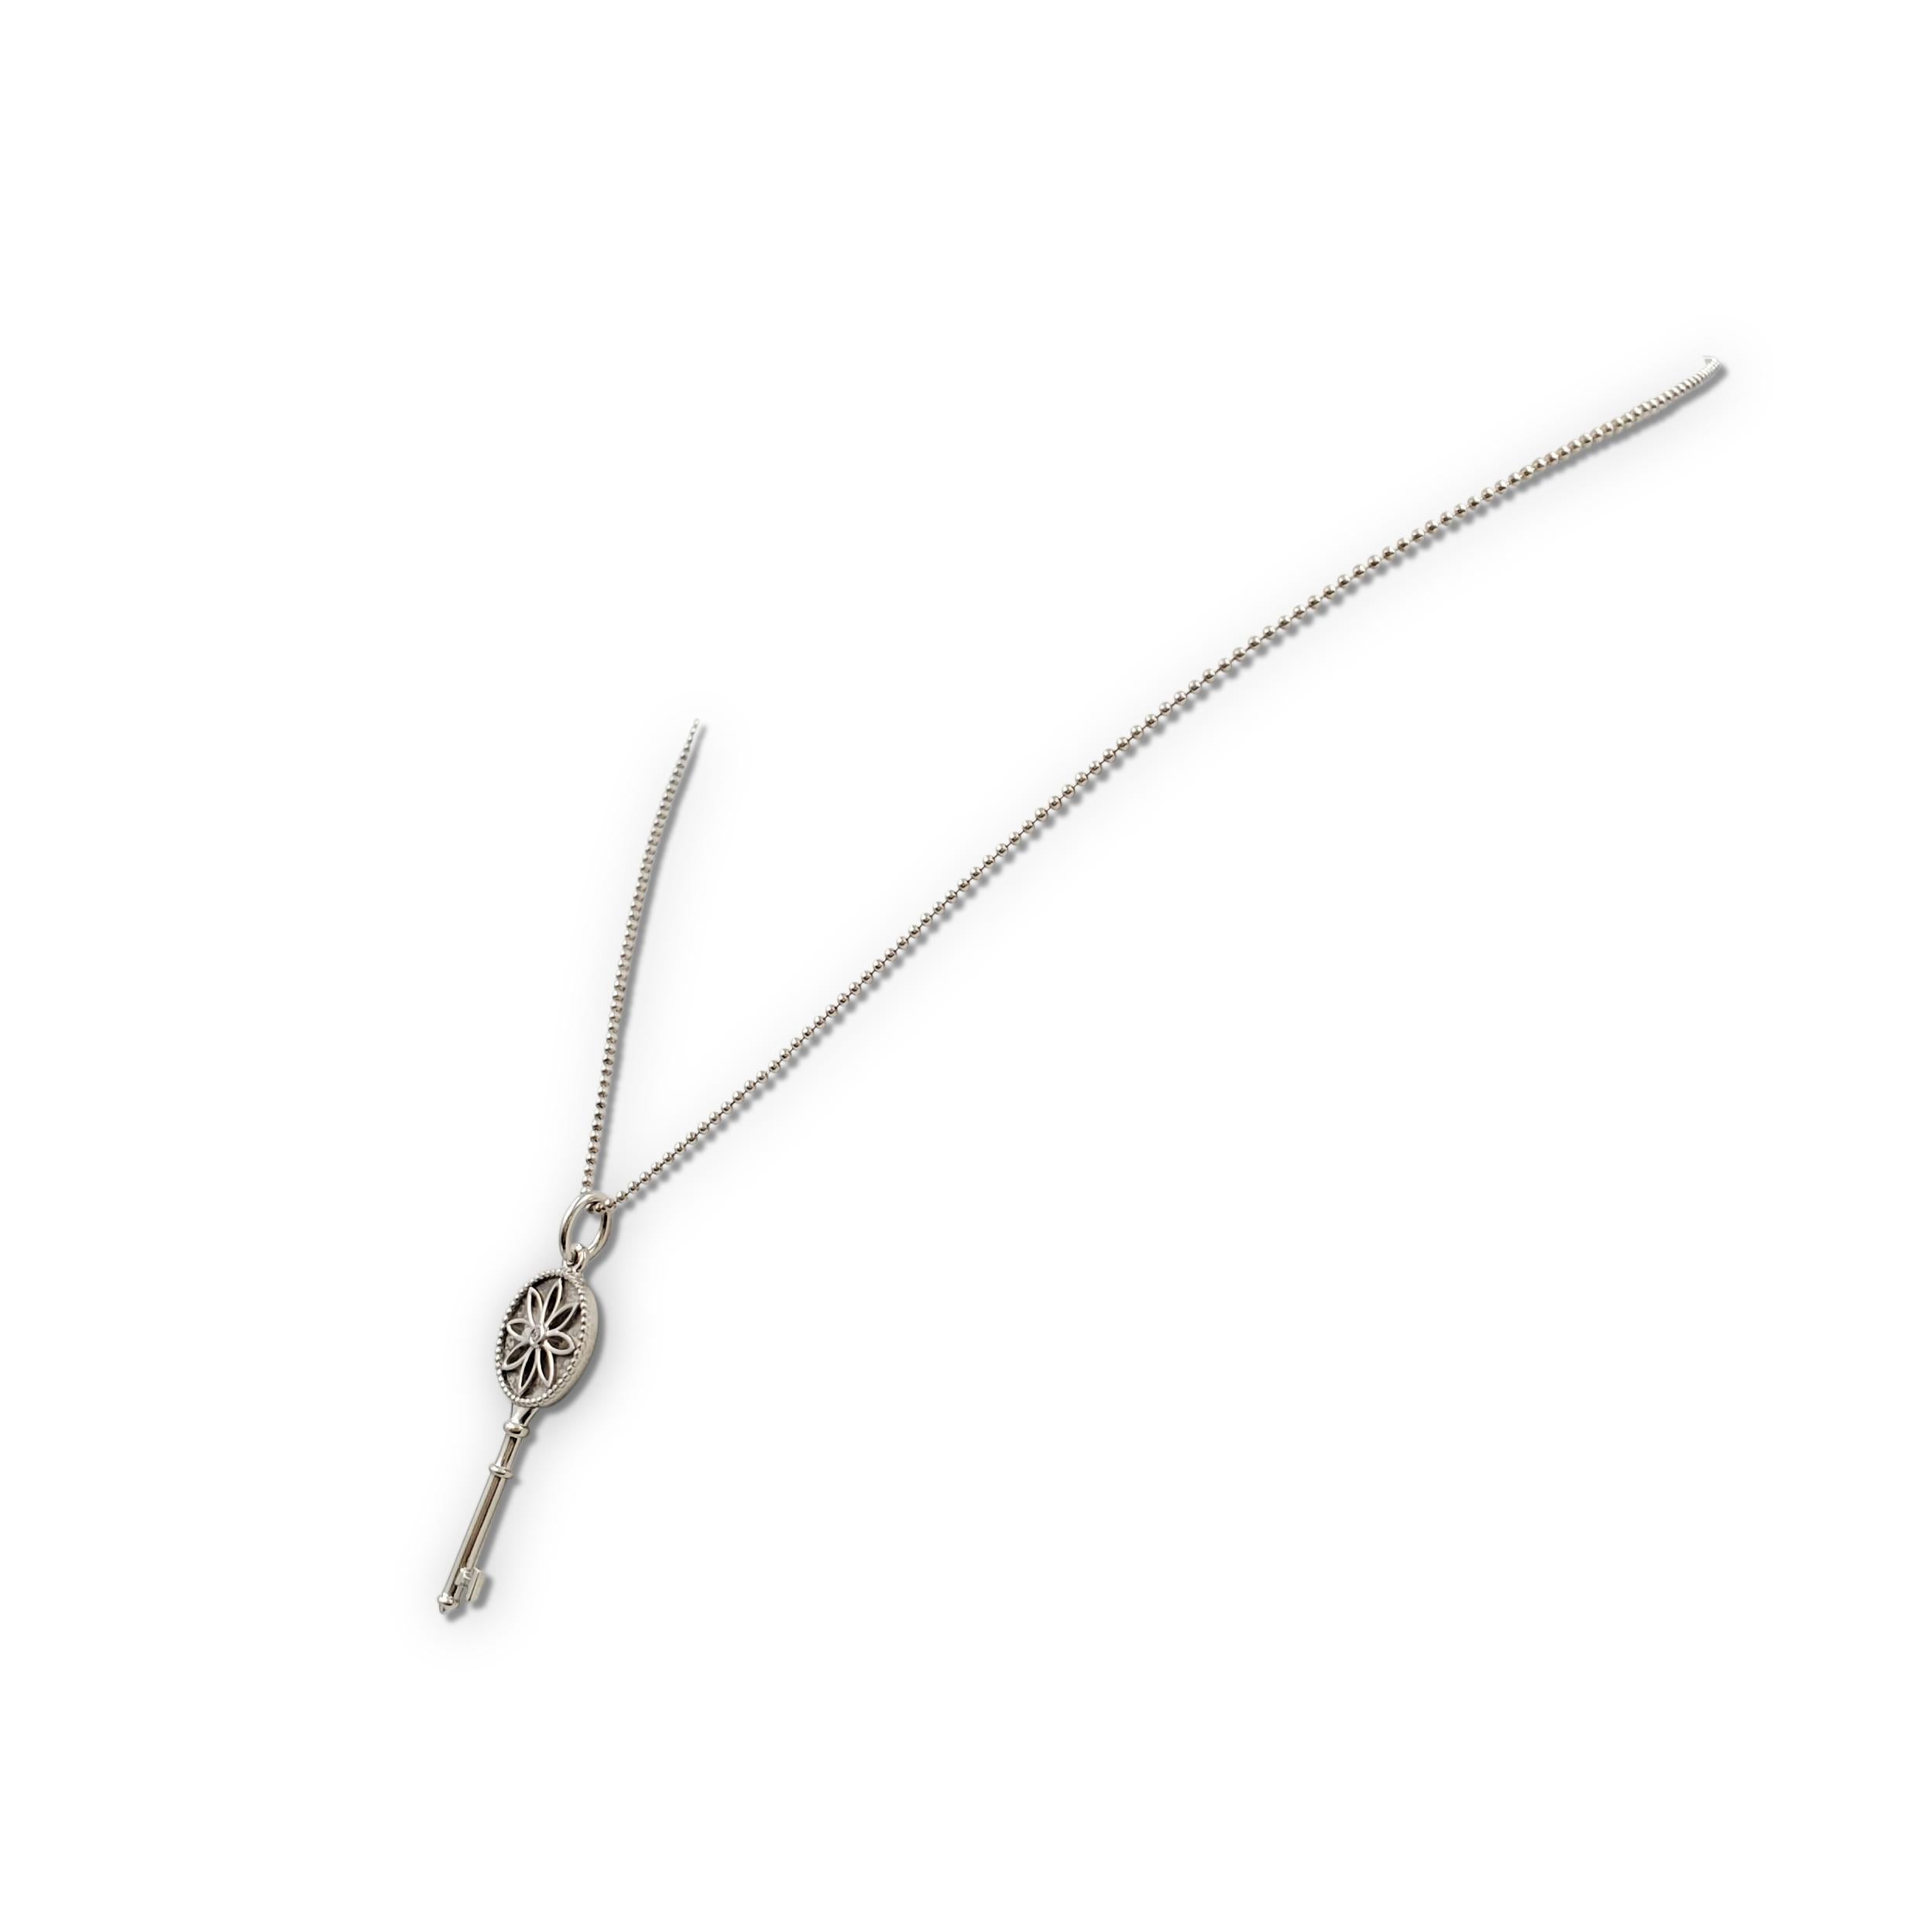 Authentic Tiffany & Co. 'Daisy Key' pendant from the Tiffany Keys collection crafted in sterling silver and ser with a single round brilliant cut diamond. The pendant hangs from a delicate Tiffany & Co. sterling silver beaded chain necklace that